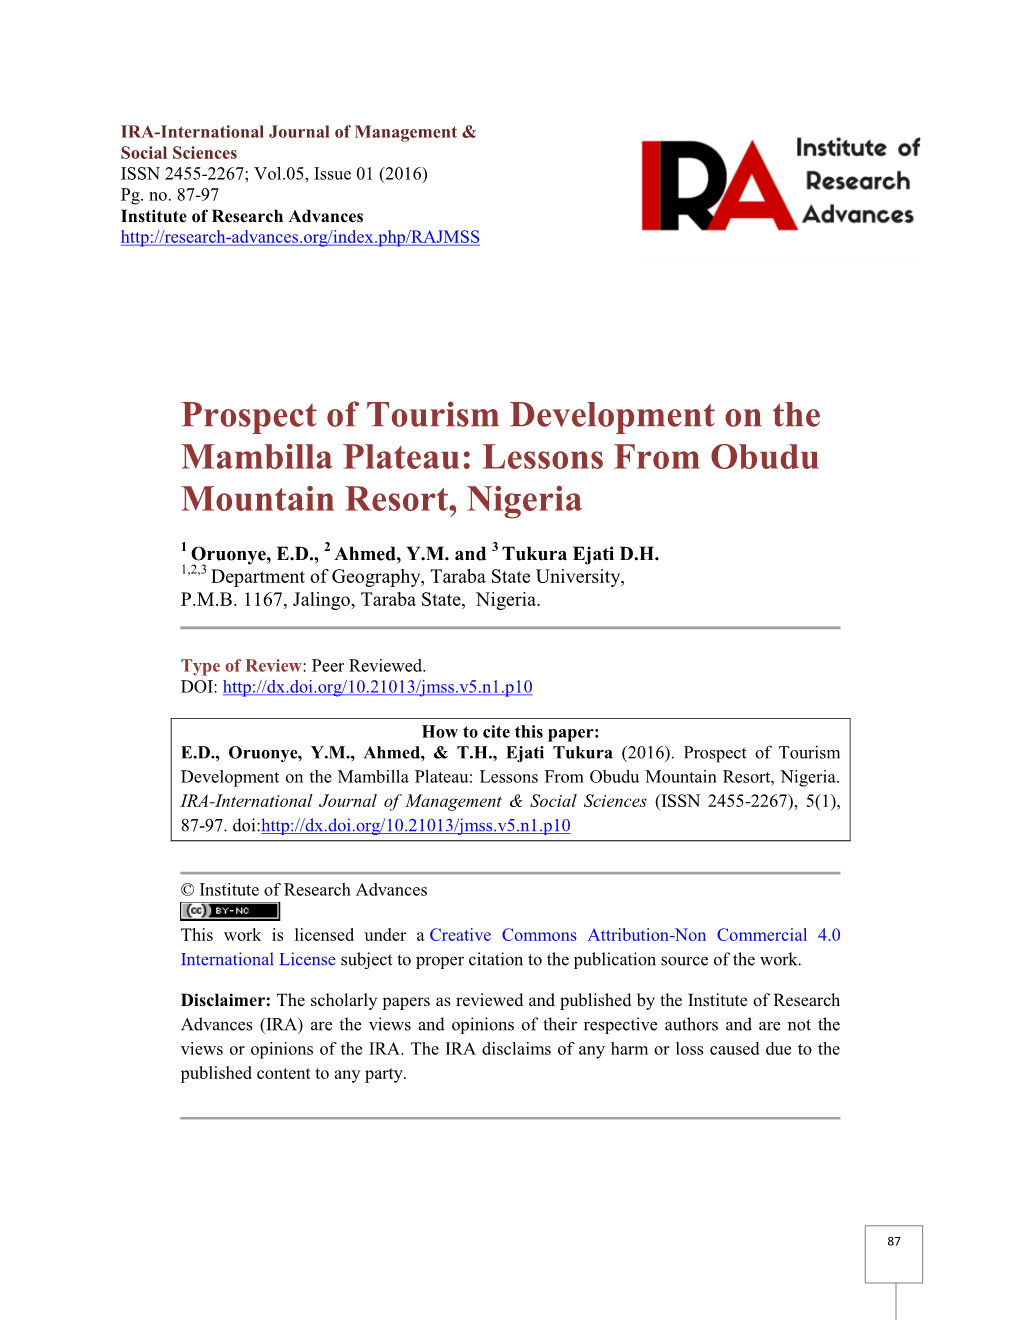 Prospect of Tourism Development on the Mambilla Plateau: Lessons from Obudu Mountain Resort, Nigeria